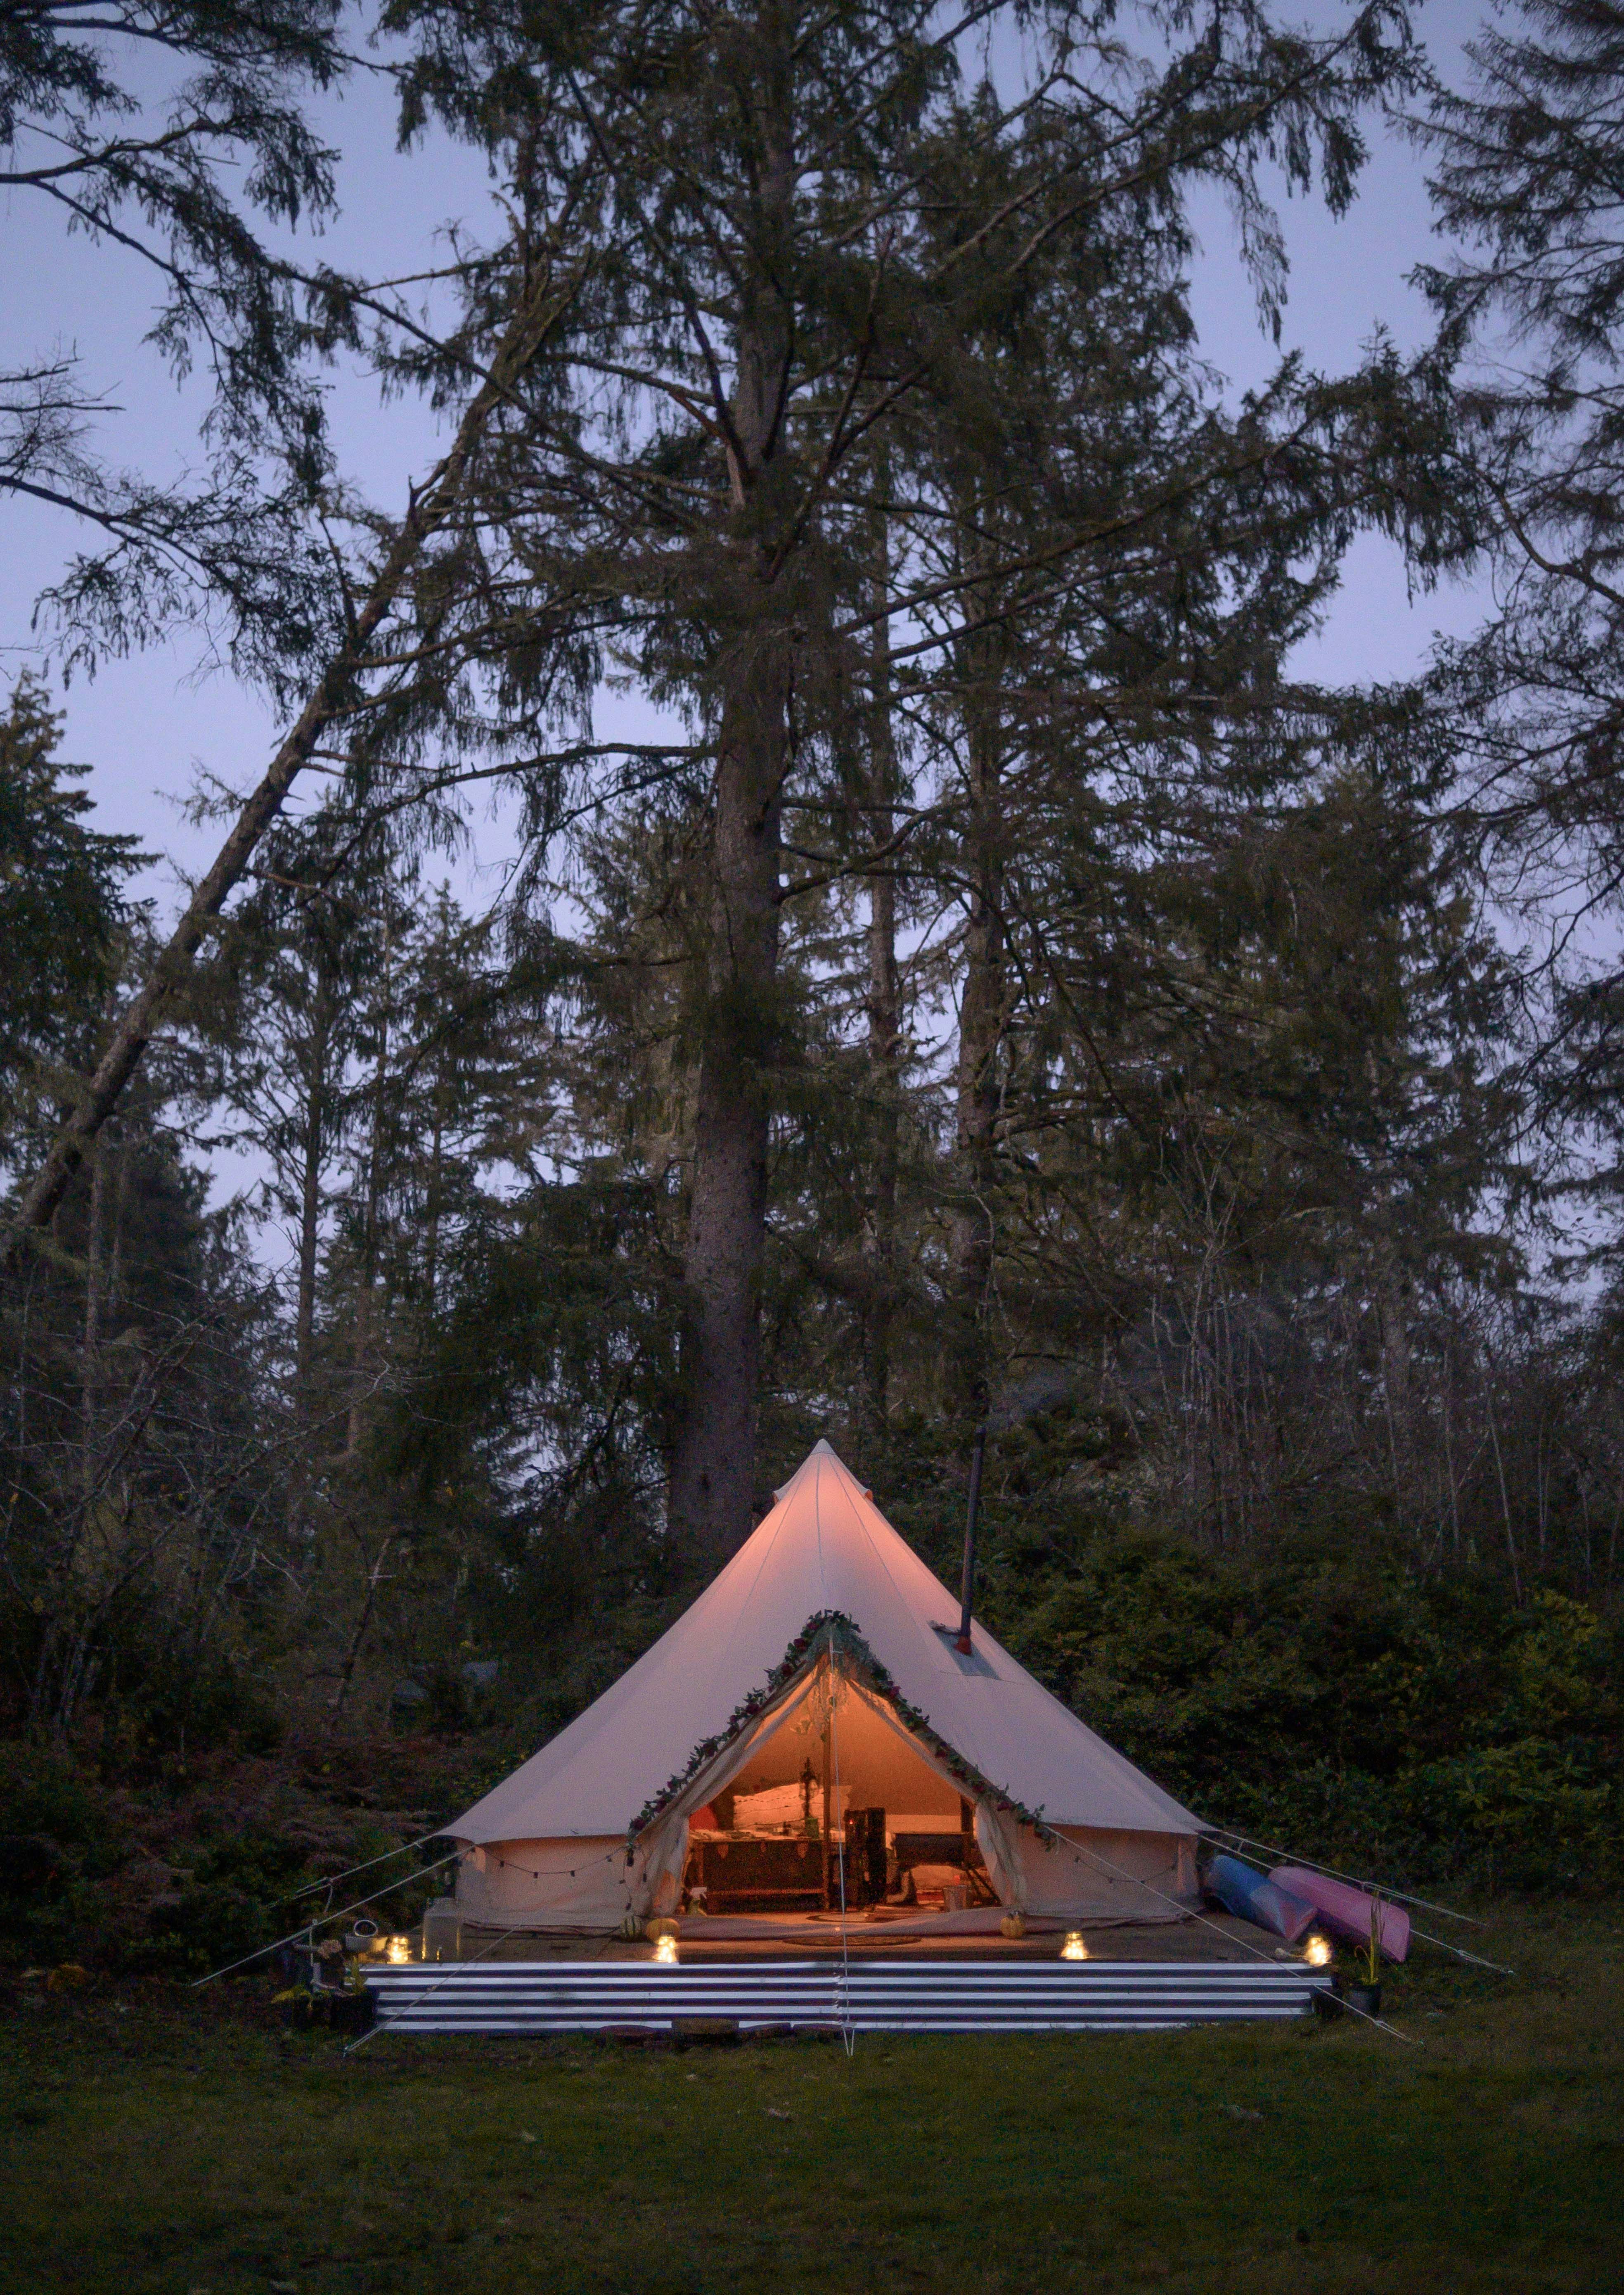 A teepee-style tent on a solid structure surrounded by dense forest at dusk